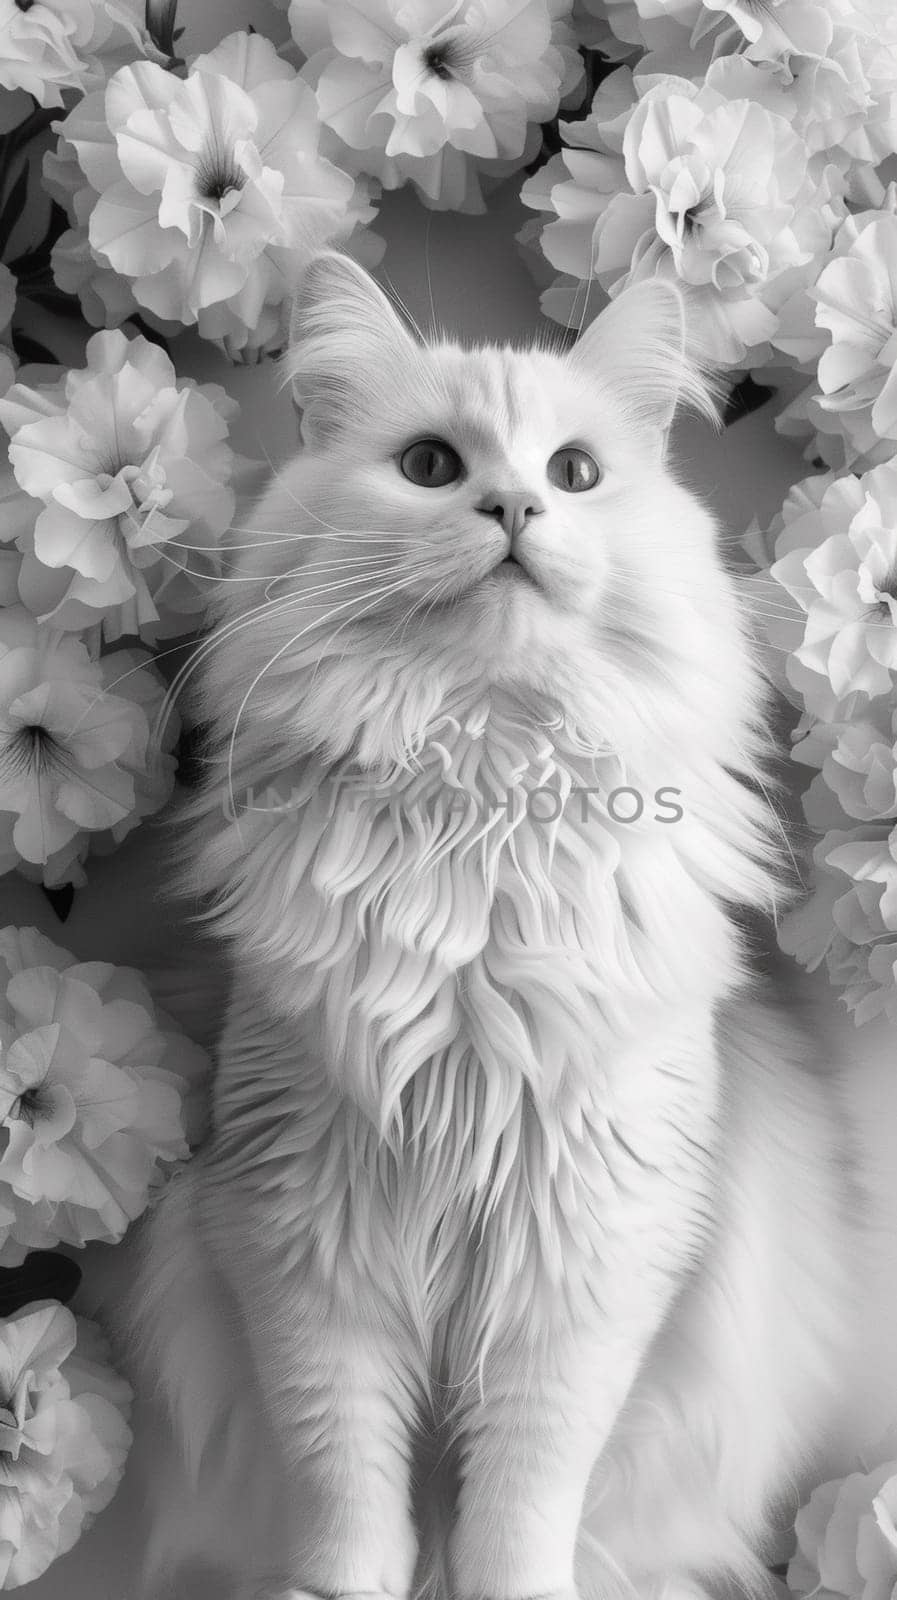 A white cat sitting in front of a bunch of flowers